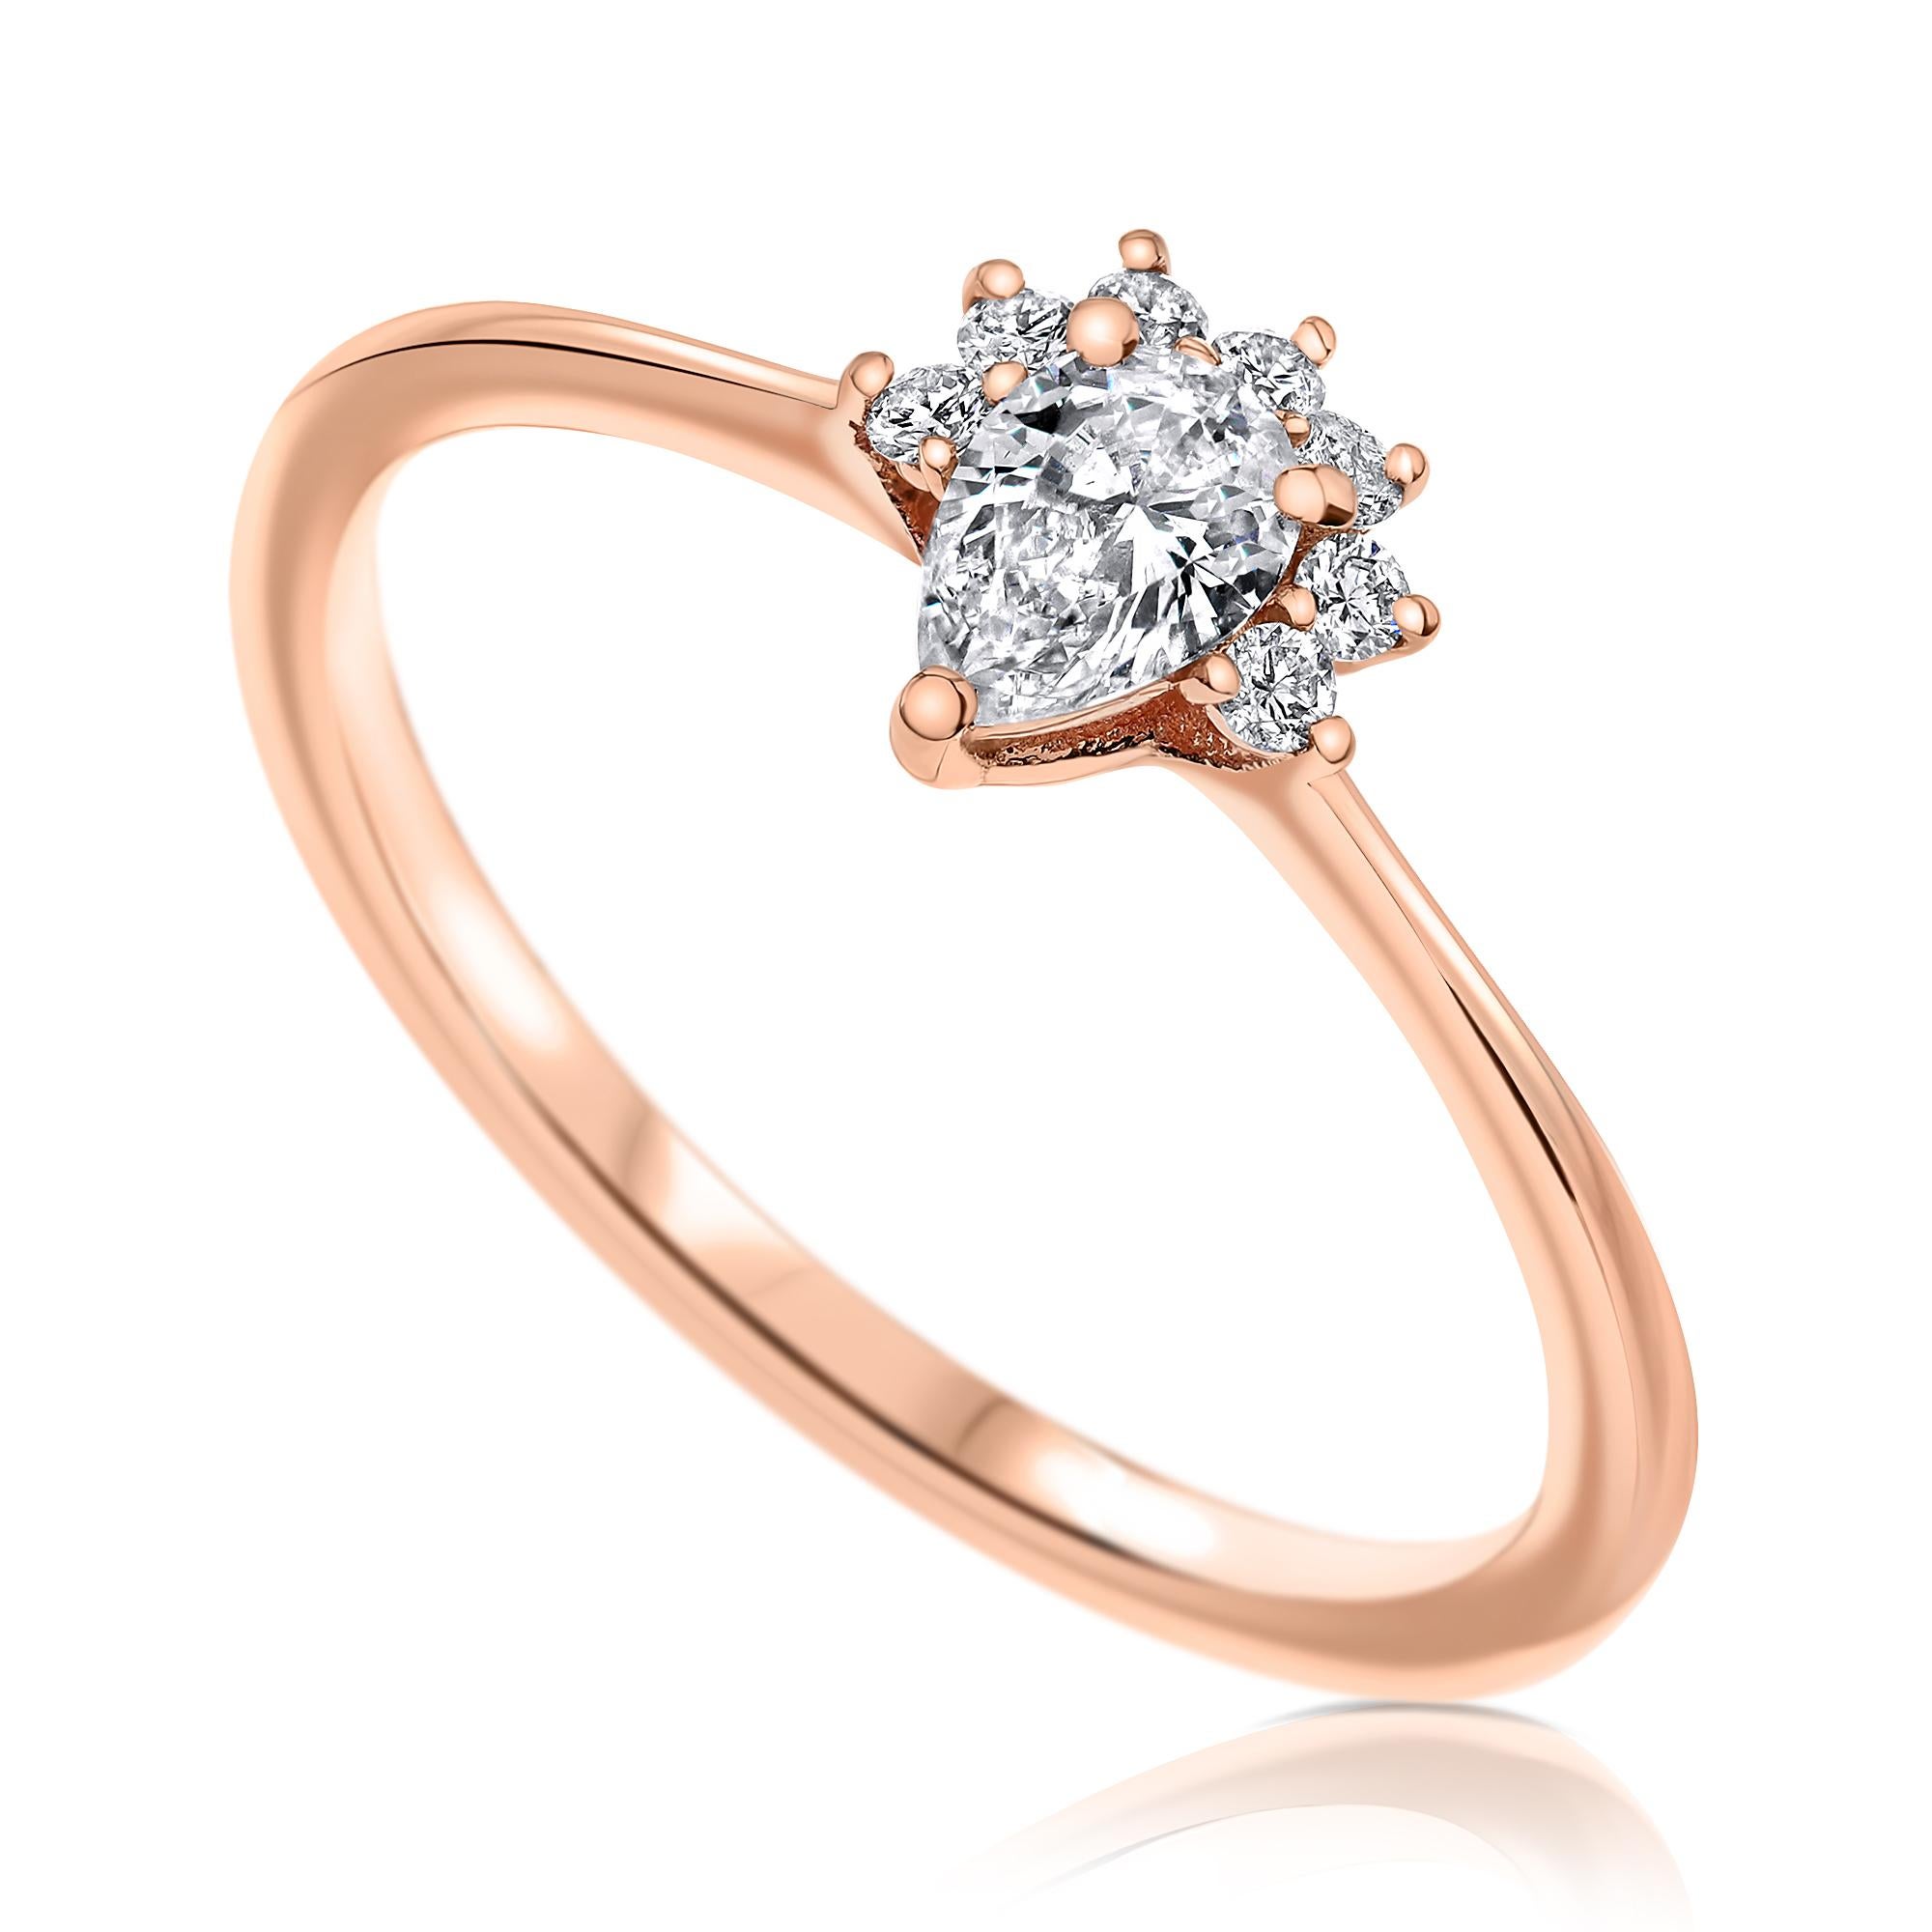 0.23 Carat Pear & Round Cut Diamonds Crown Ring 14K Rose Gold - Shlomit Rogel

This dainty ring is full of shine! Crafted from 14k rose gold, this ring features a pear shaped diamond surrounded by 7 round diamonds. It's elegant and chic and can be